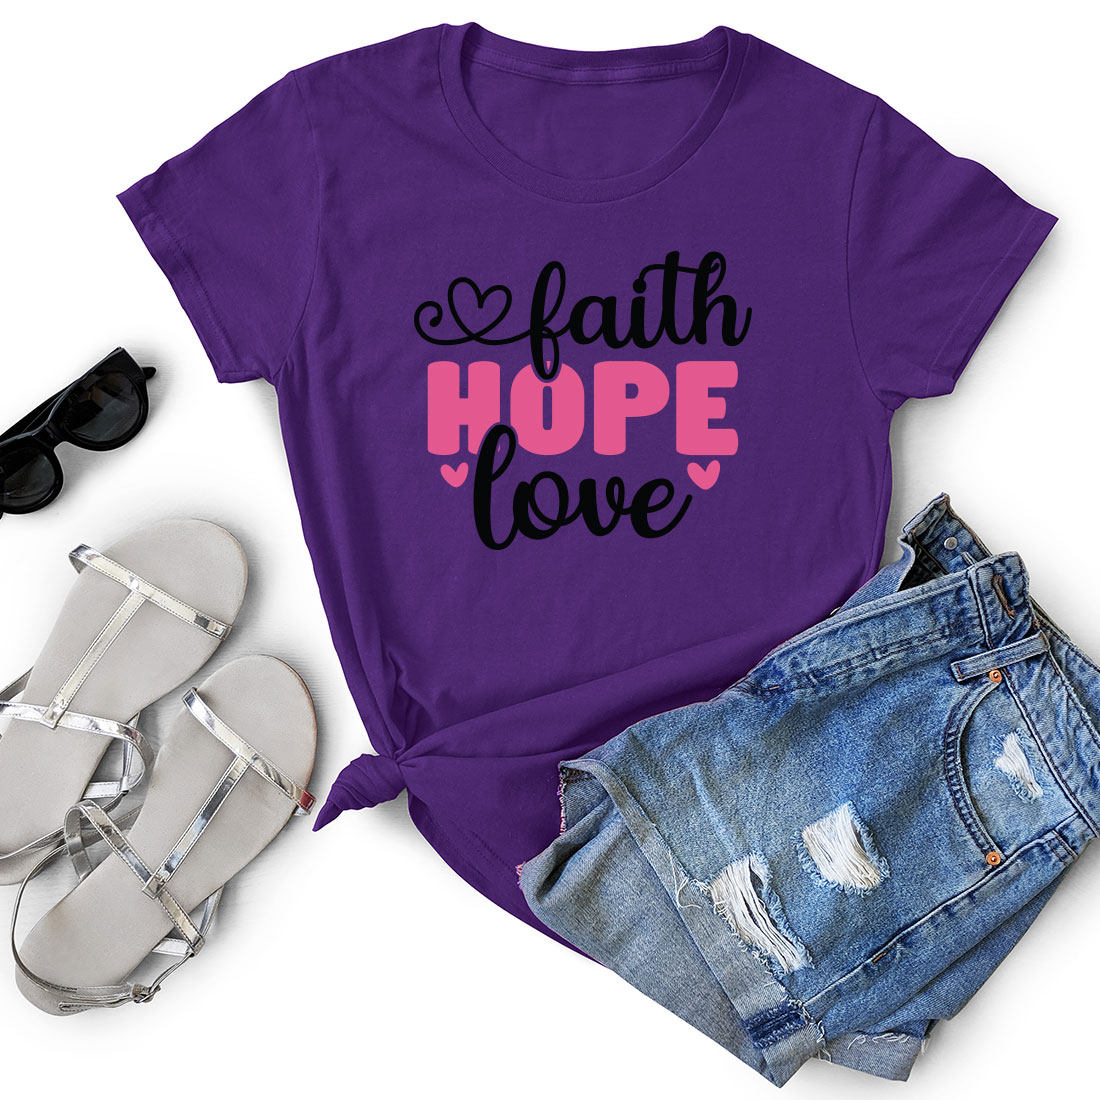 T - shirt that says faith hope love next to a pair of shorts.